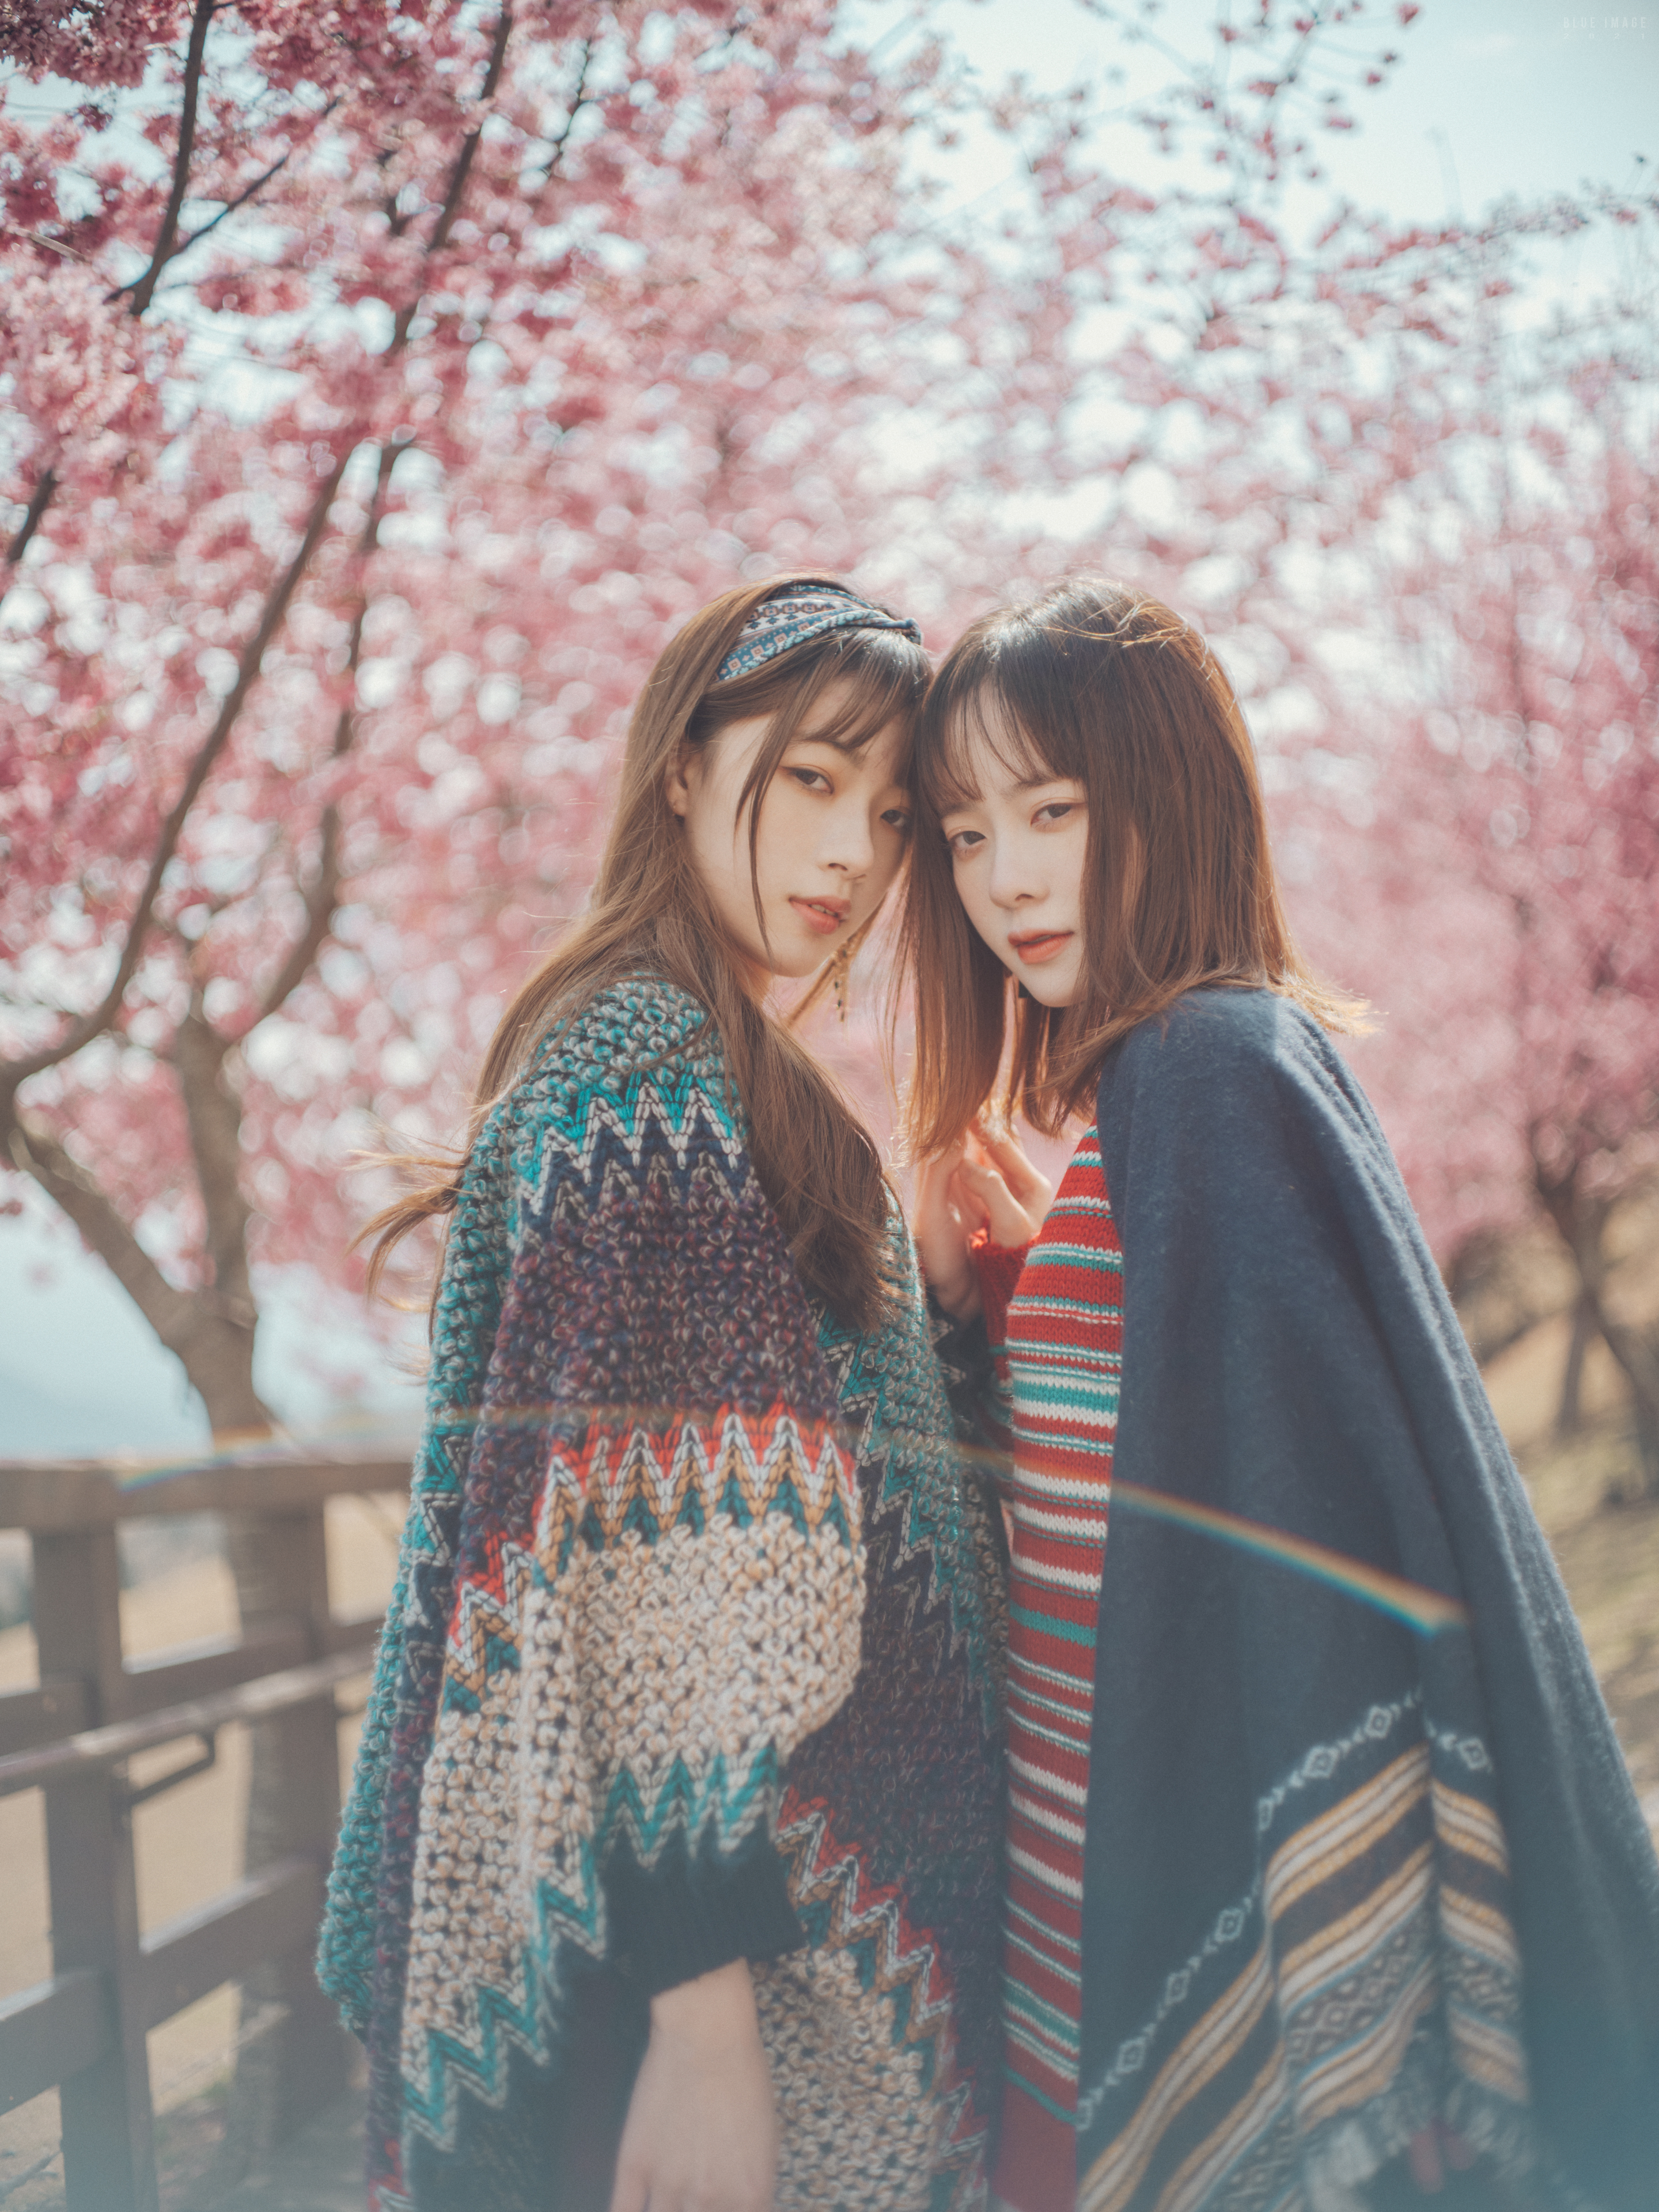 People 2880x3840 Asian women two women outdoors women outdoors model cherry blossom brunette looking at viewer